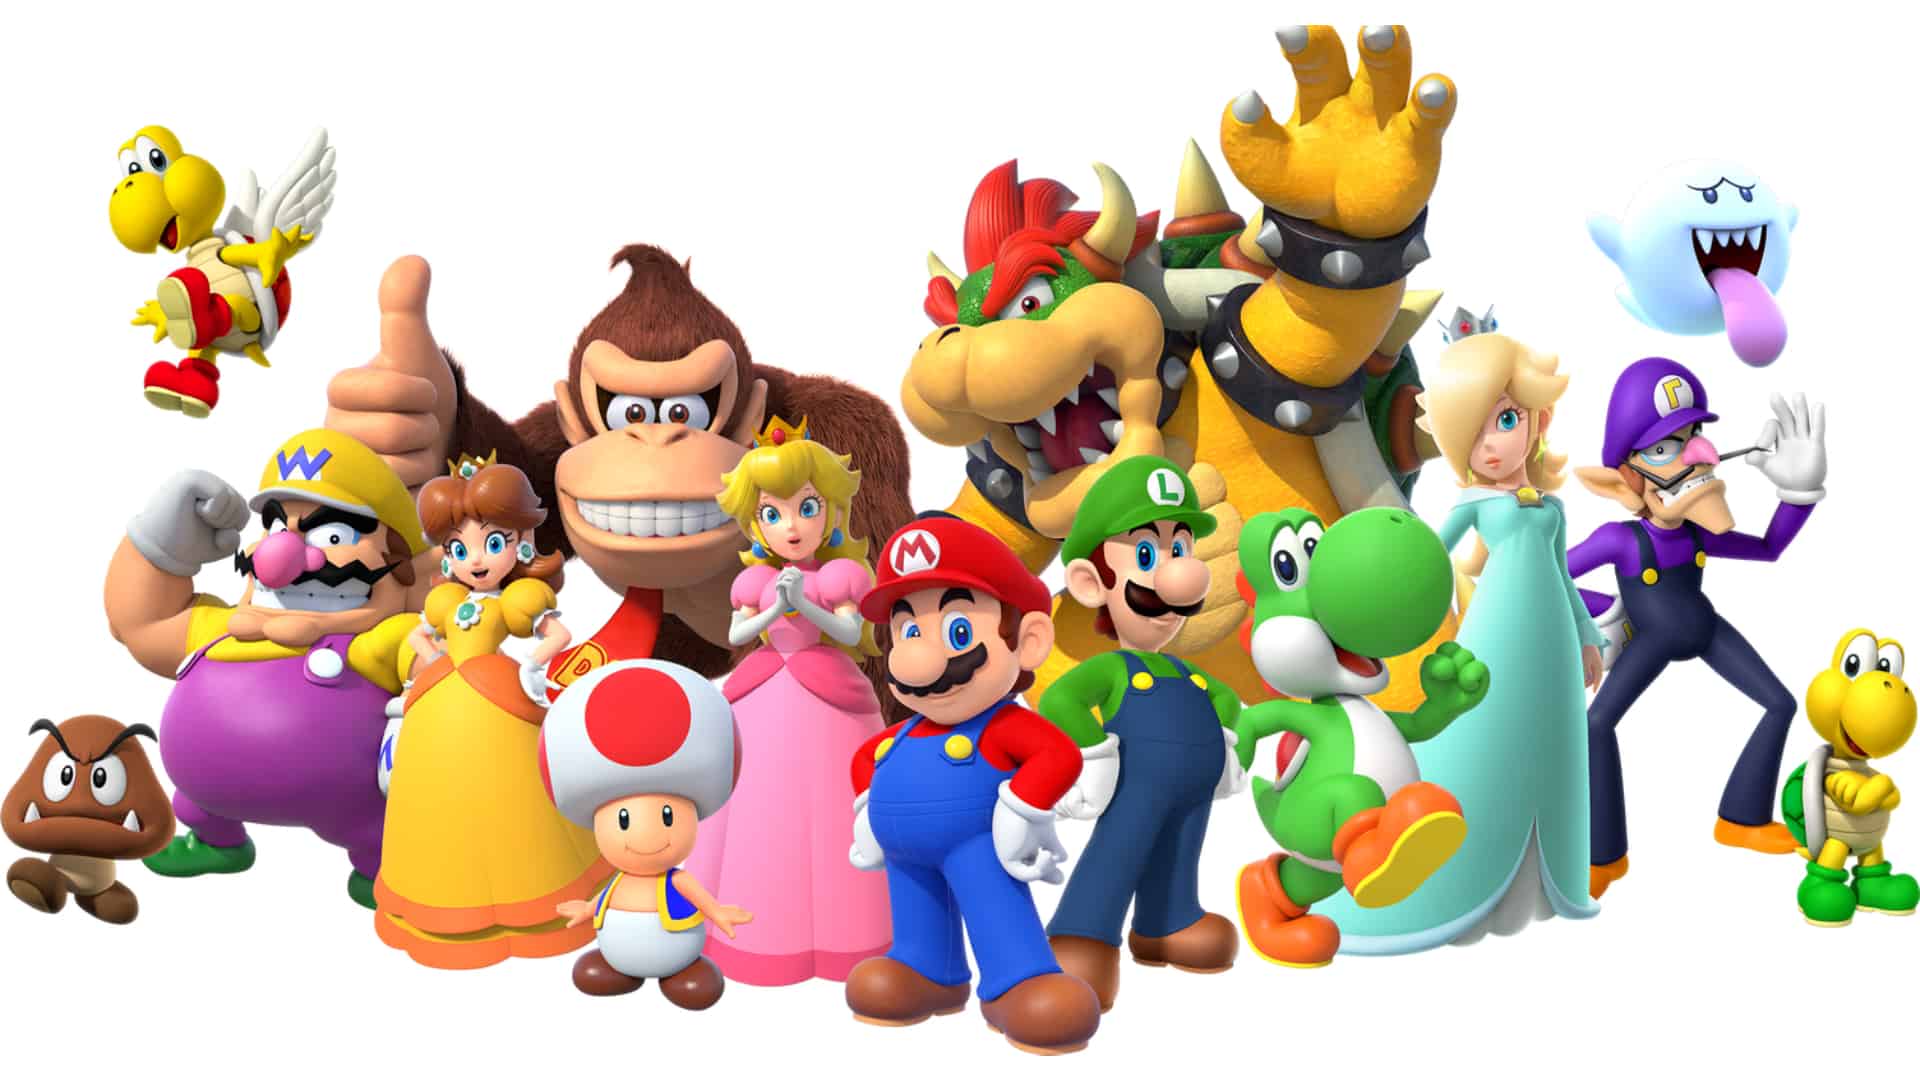 A promotional image of a group of Super Mario characters.